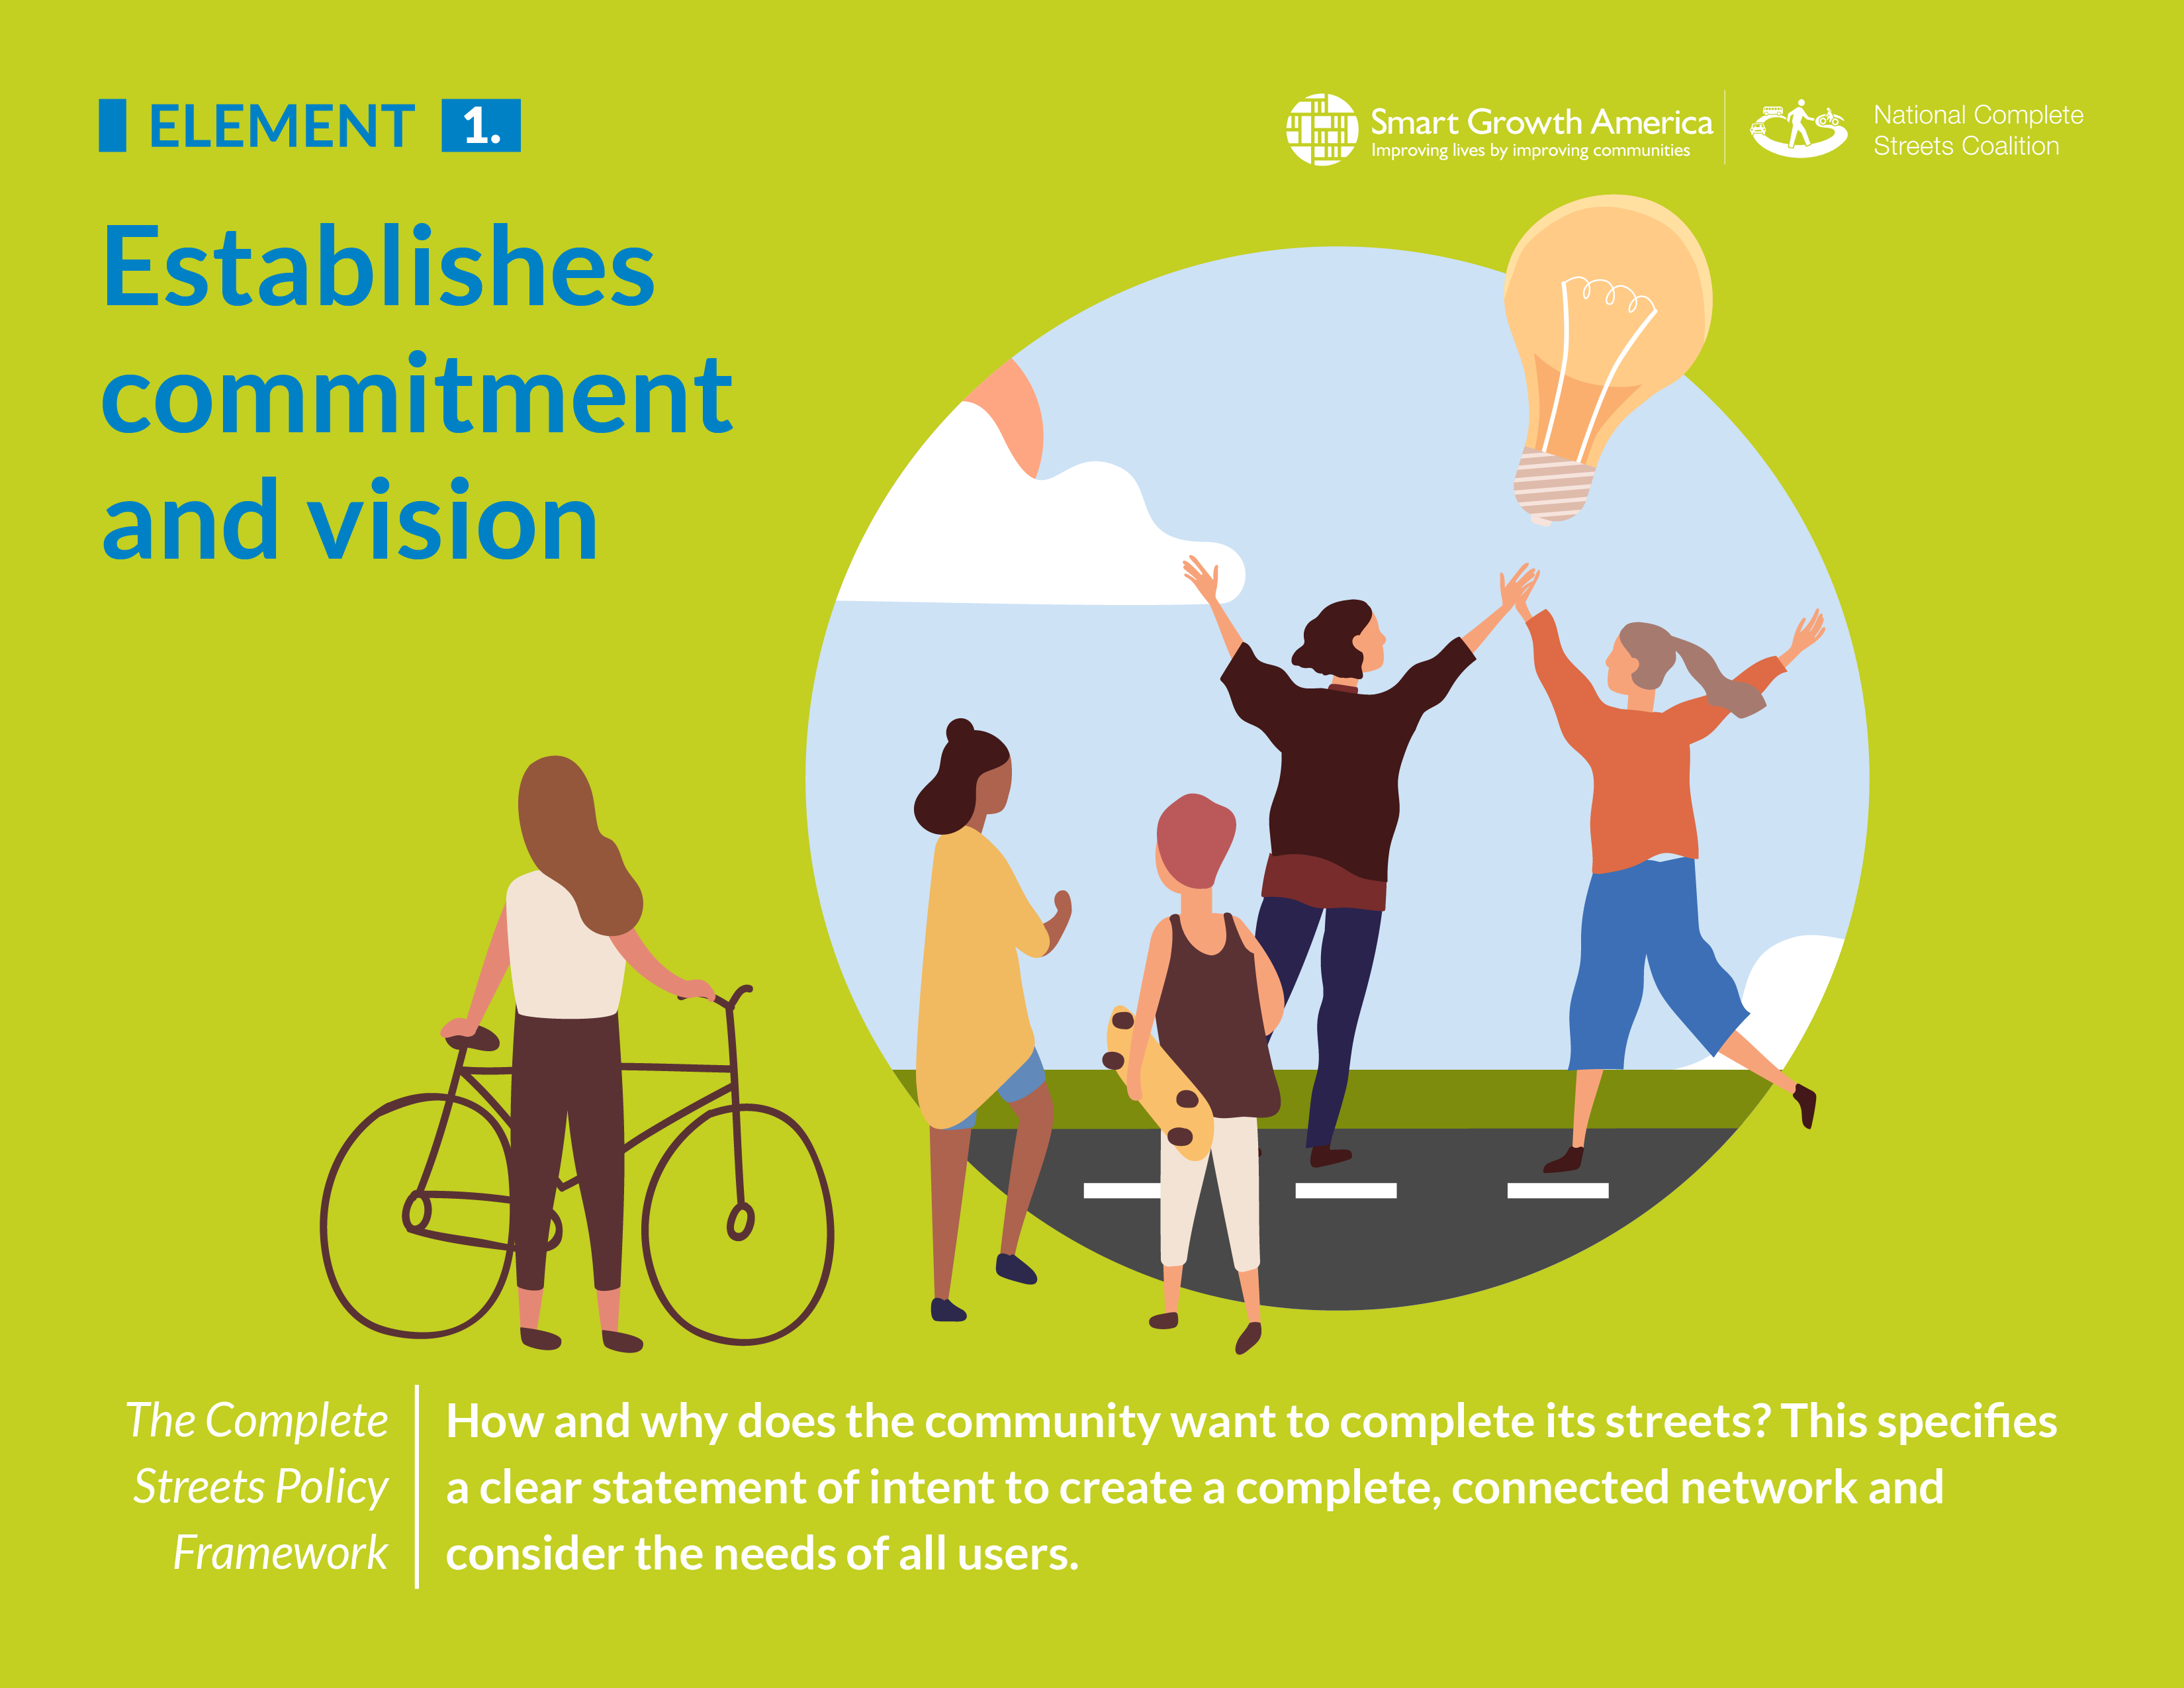 Stylized graphic illustrating the first element of a complete streets policy: Establishes commitment and vision